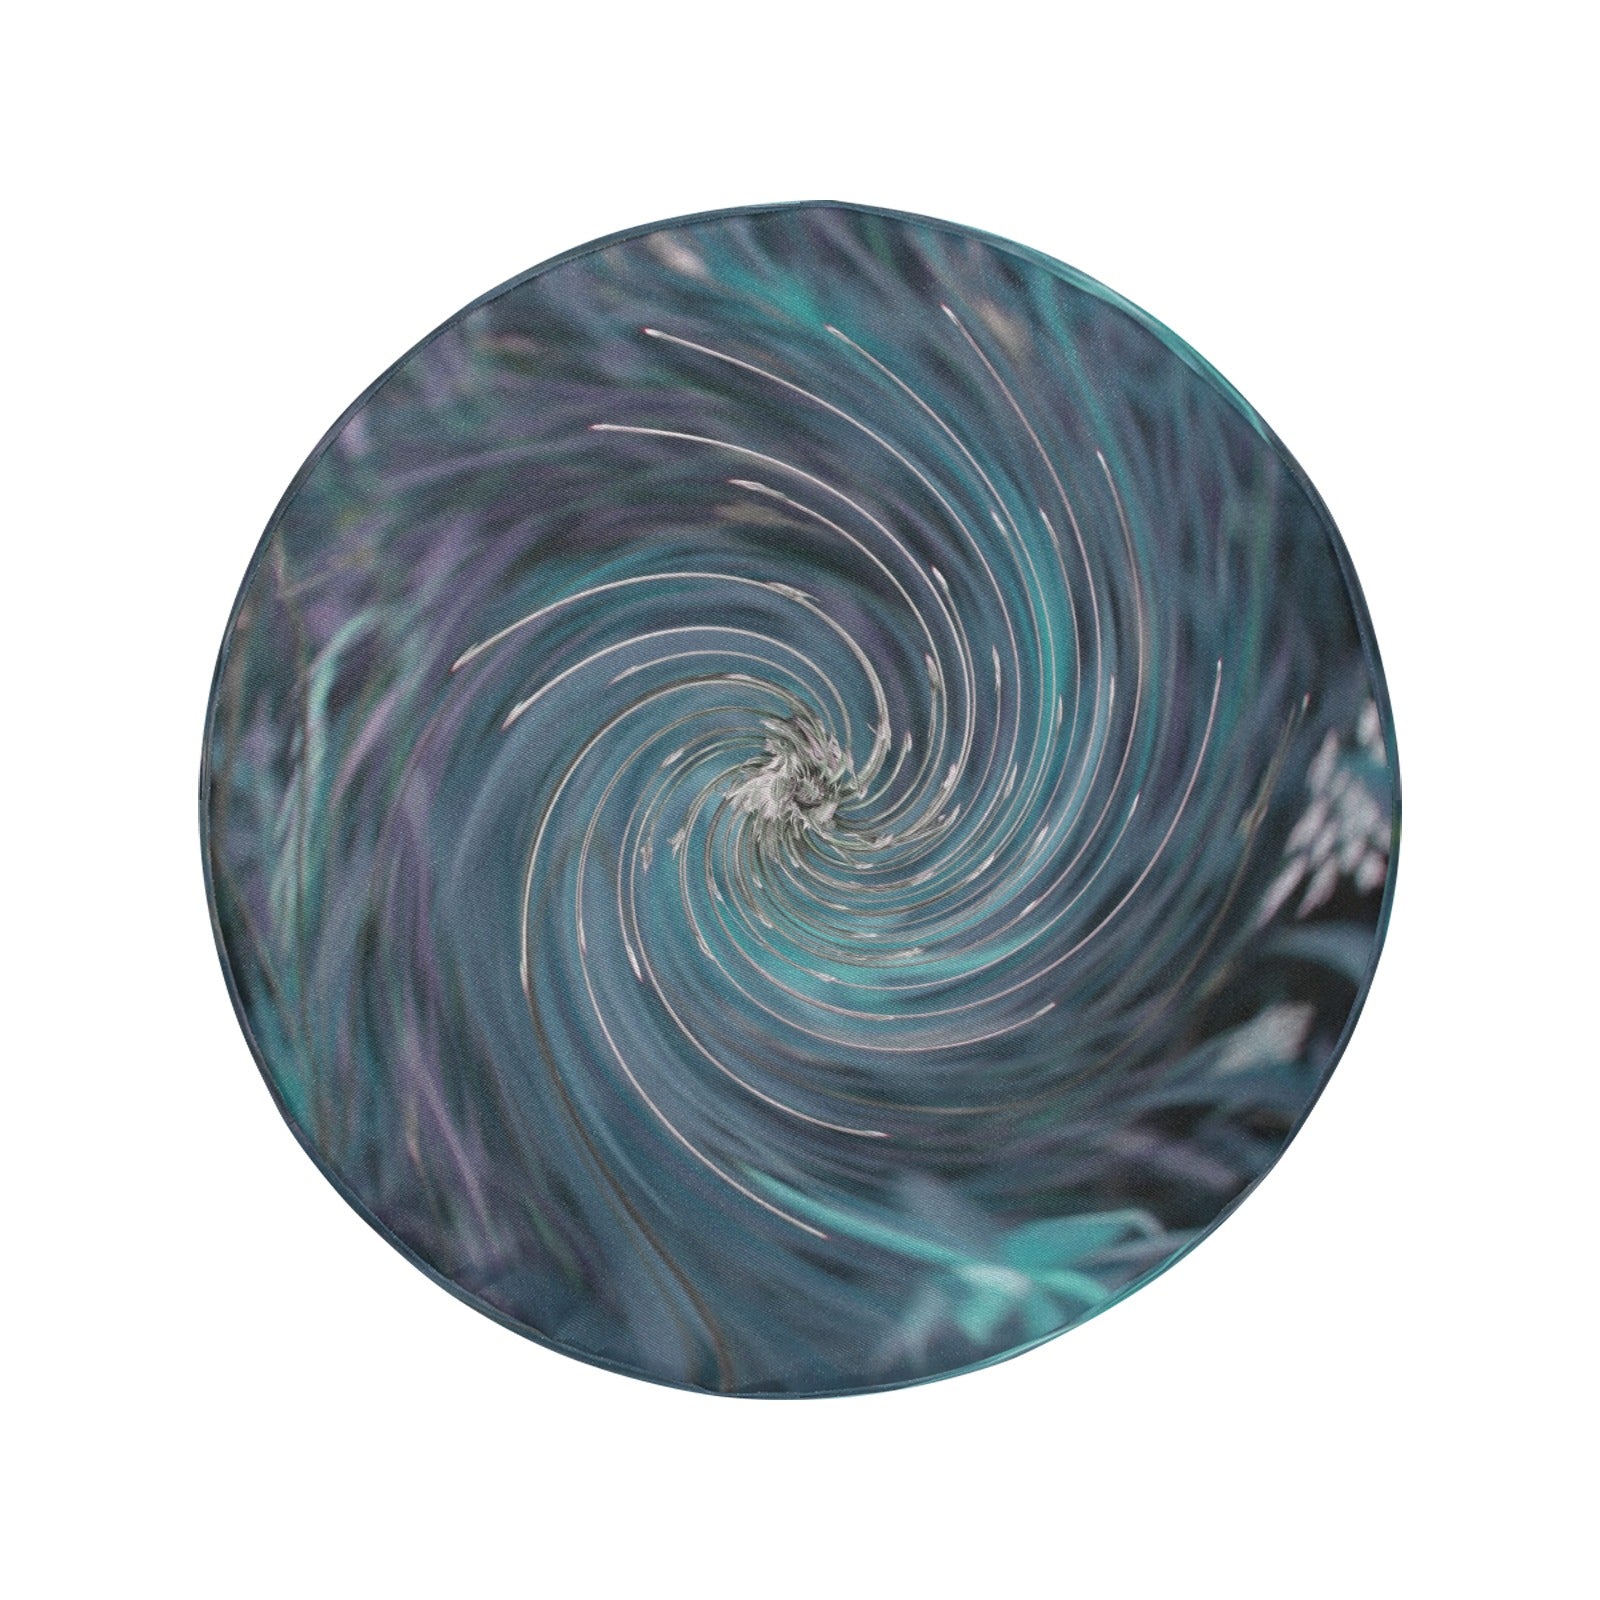 Spare Tire Covers, Cool Abstract Retro Black and Teal Cosmic Swirl - Large